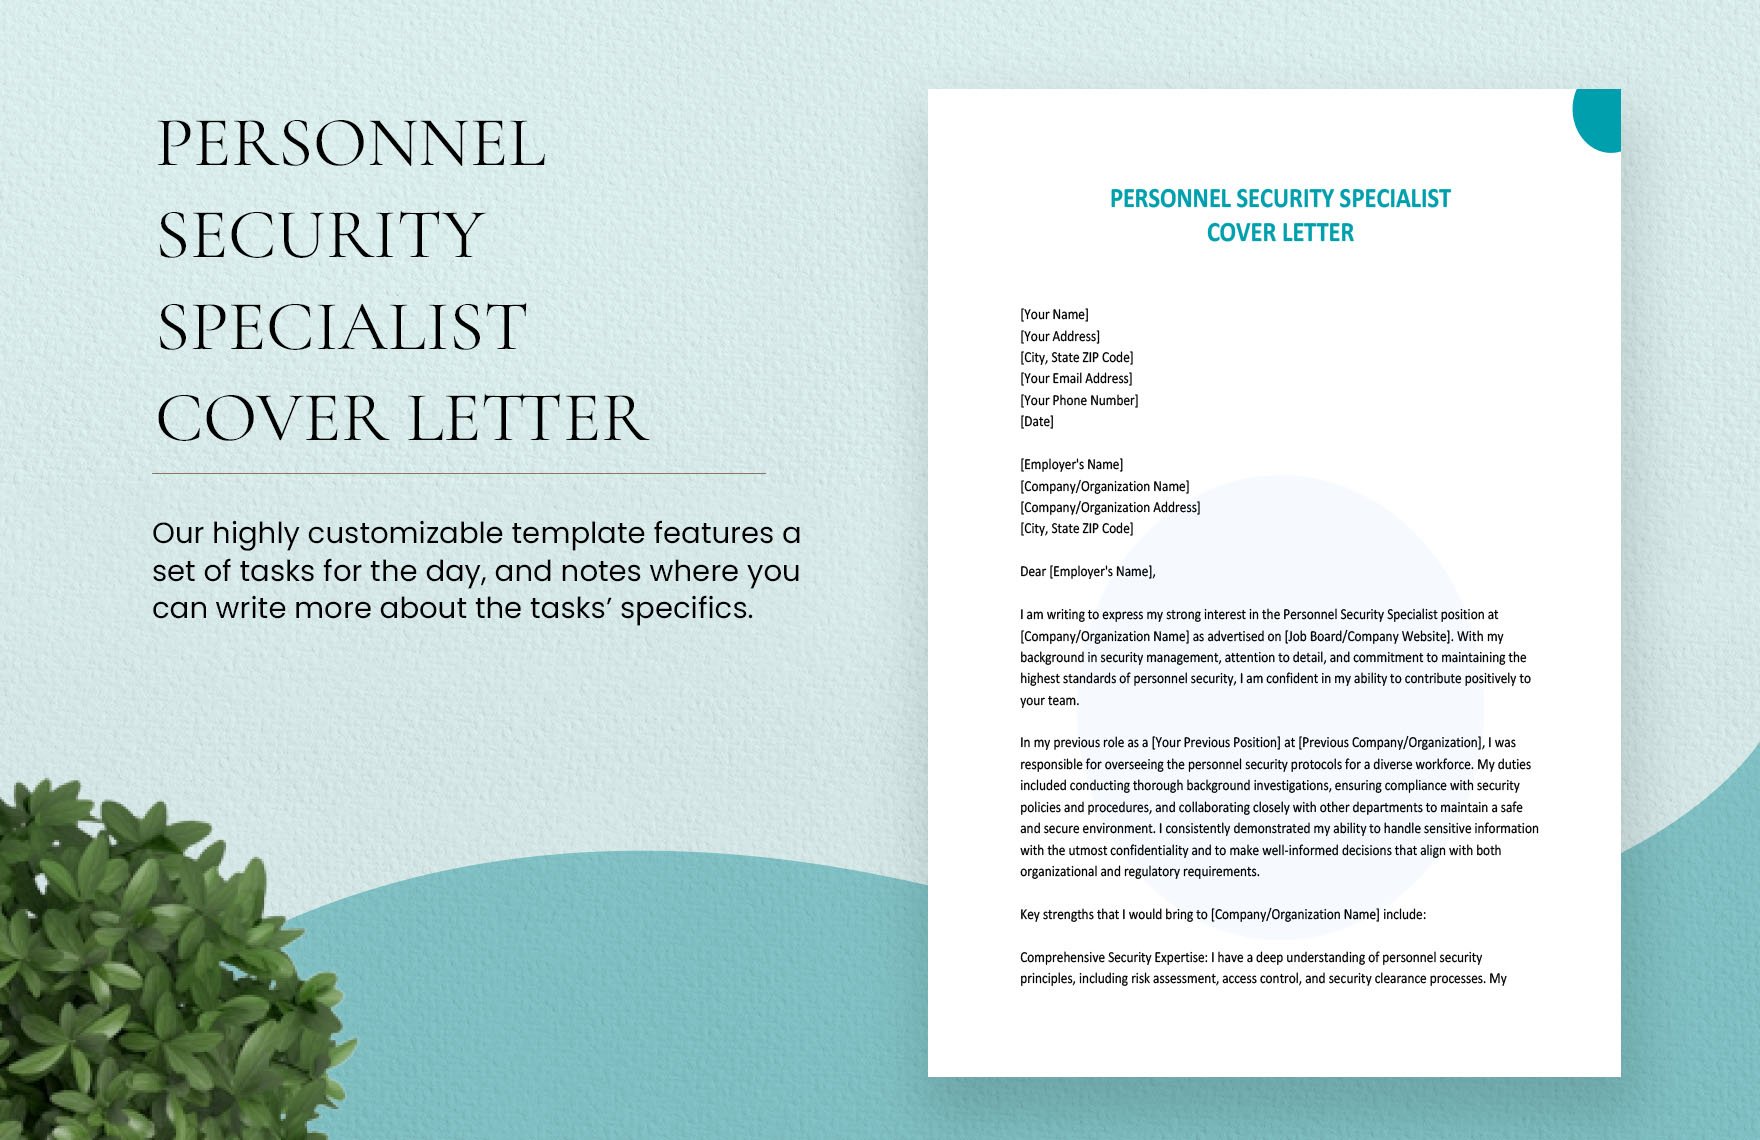 Personnel Security Specialist Cover Letter